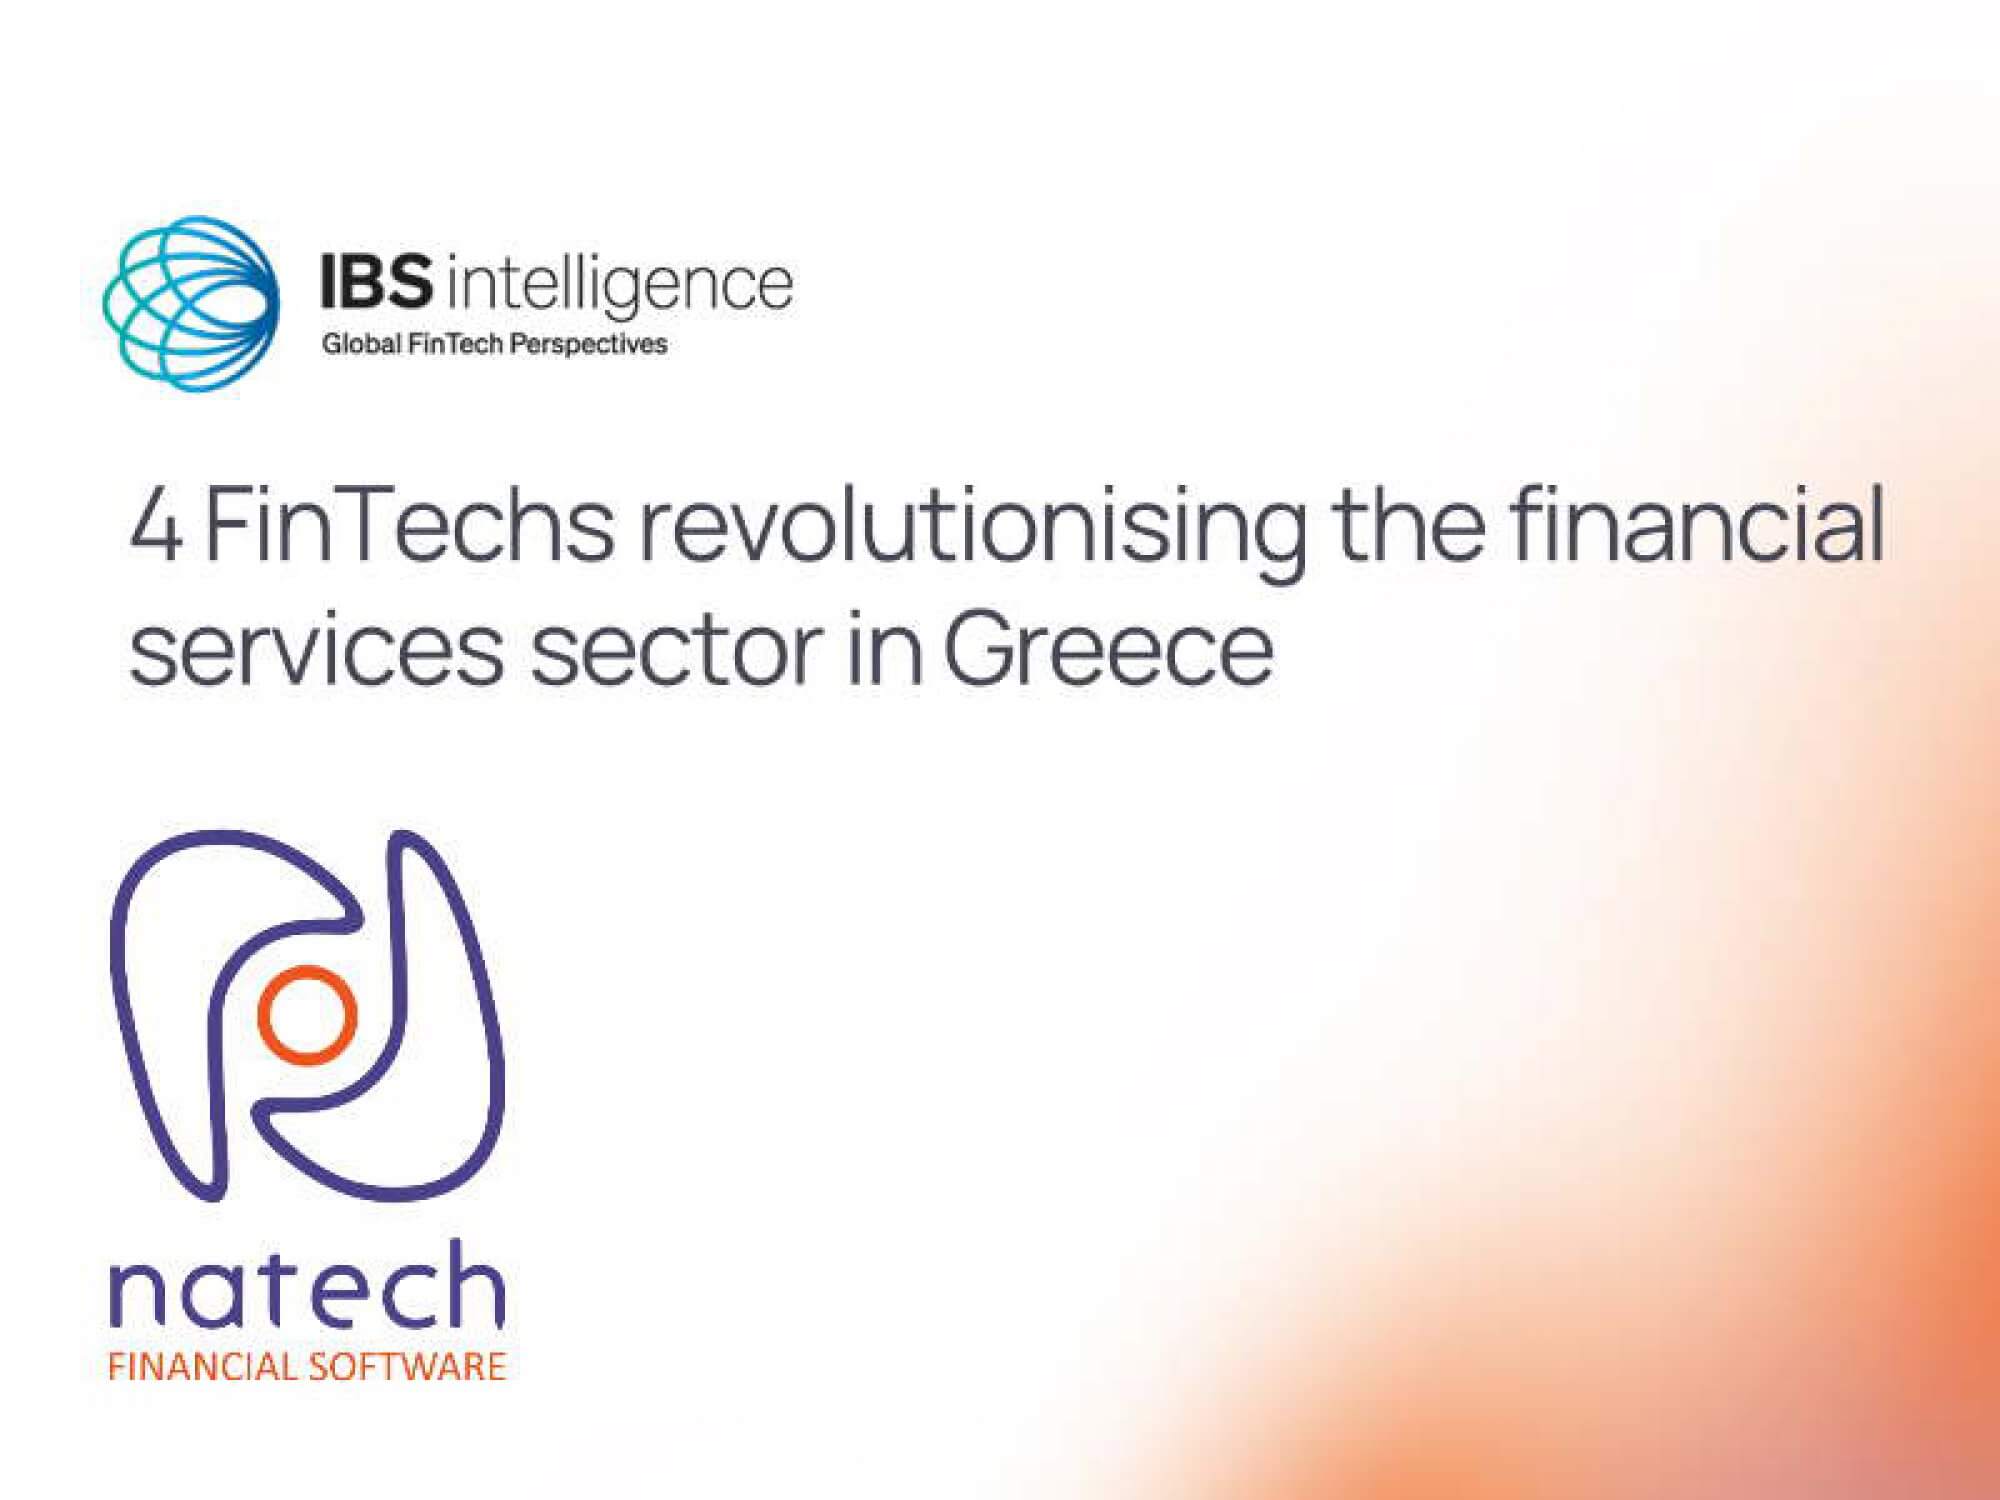 Natech news: Revolutionizing the financial sector in Greece!